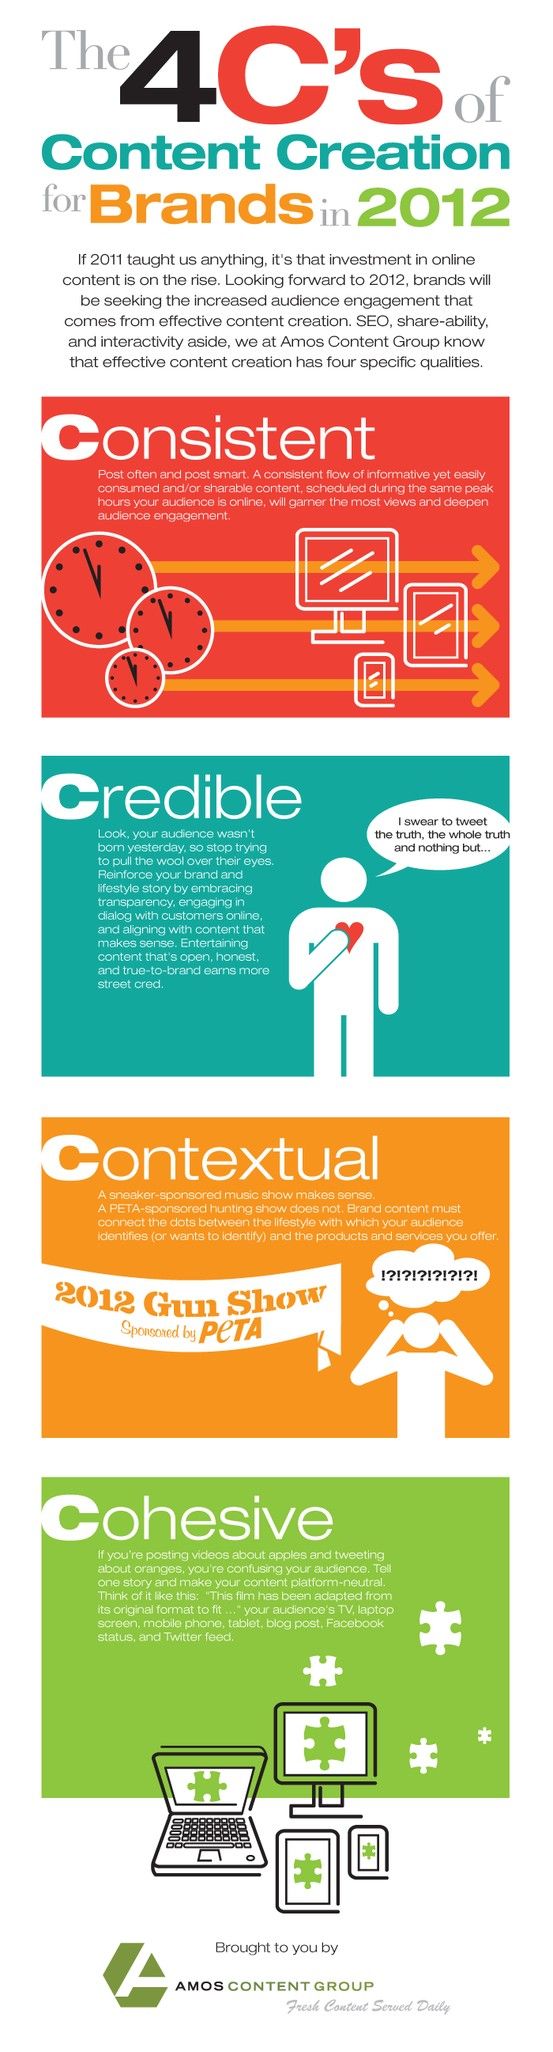 The 4 C's of Content Creation #infographic #smm #socialmedia #in